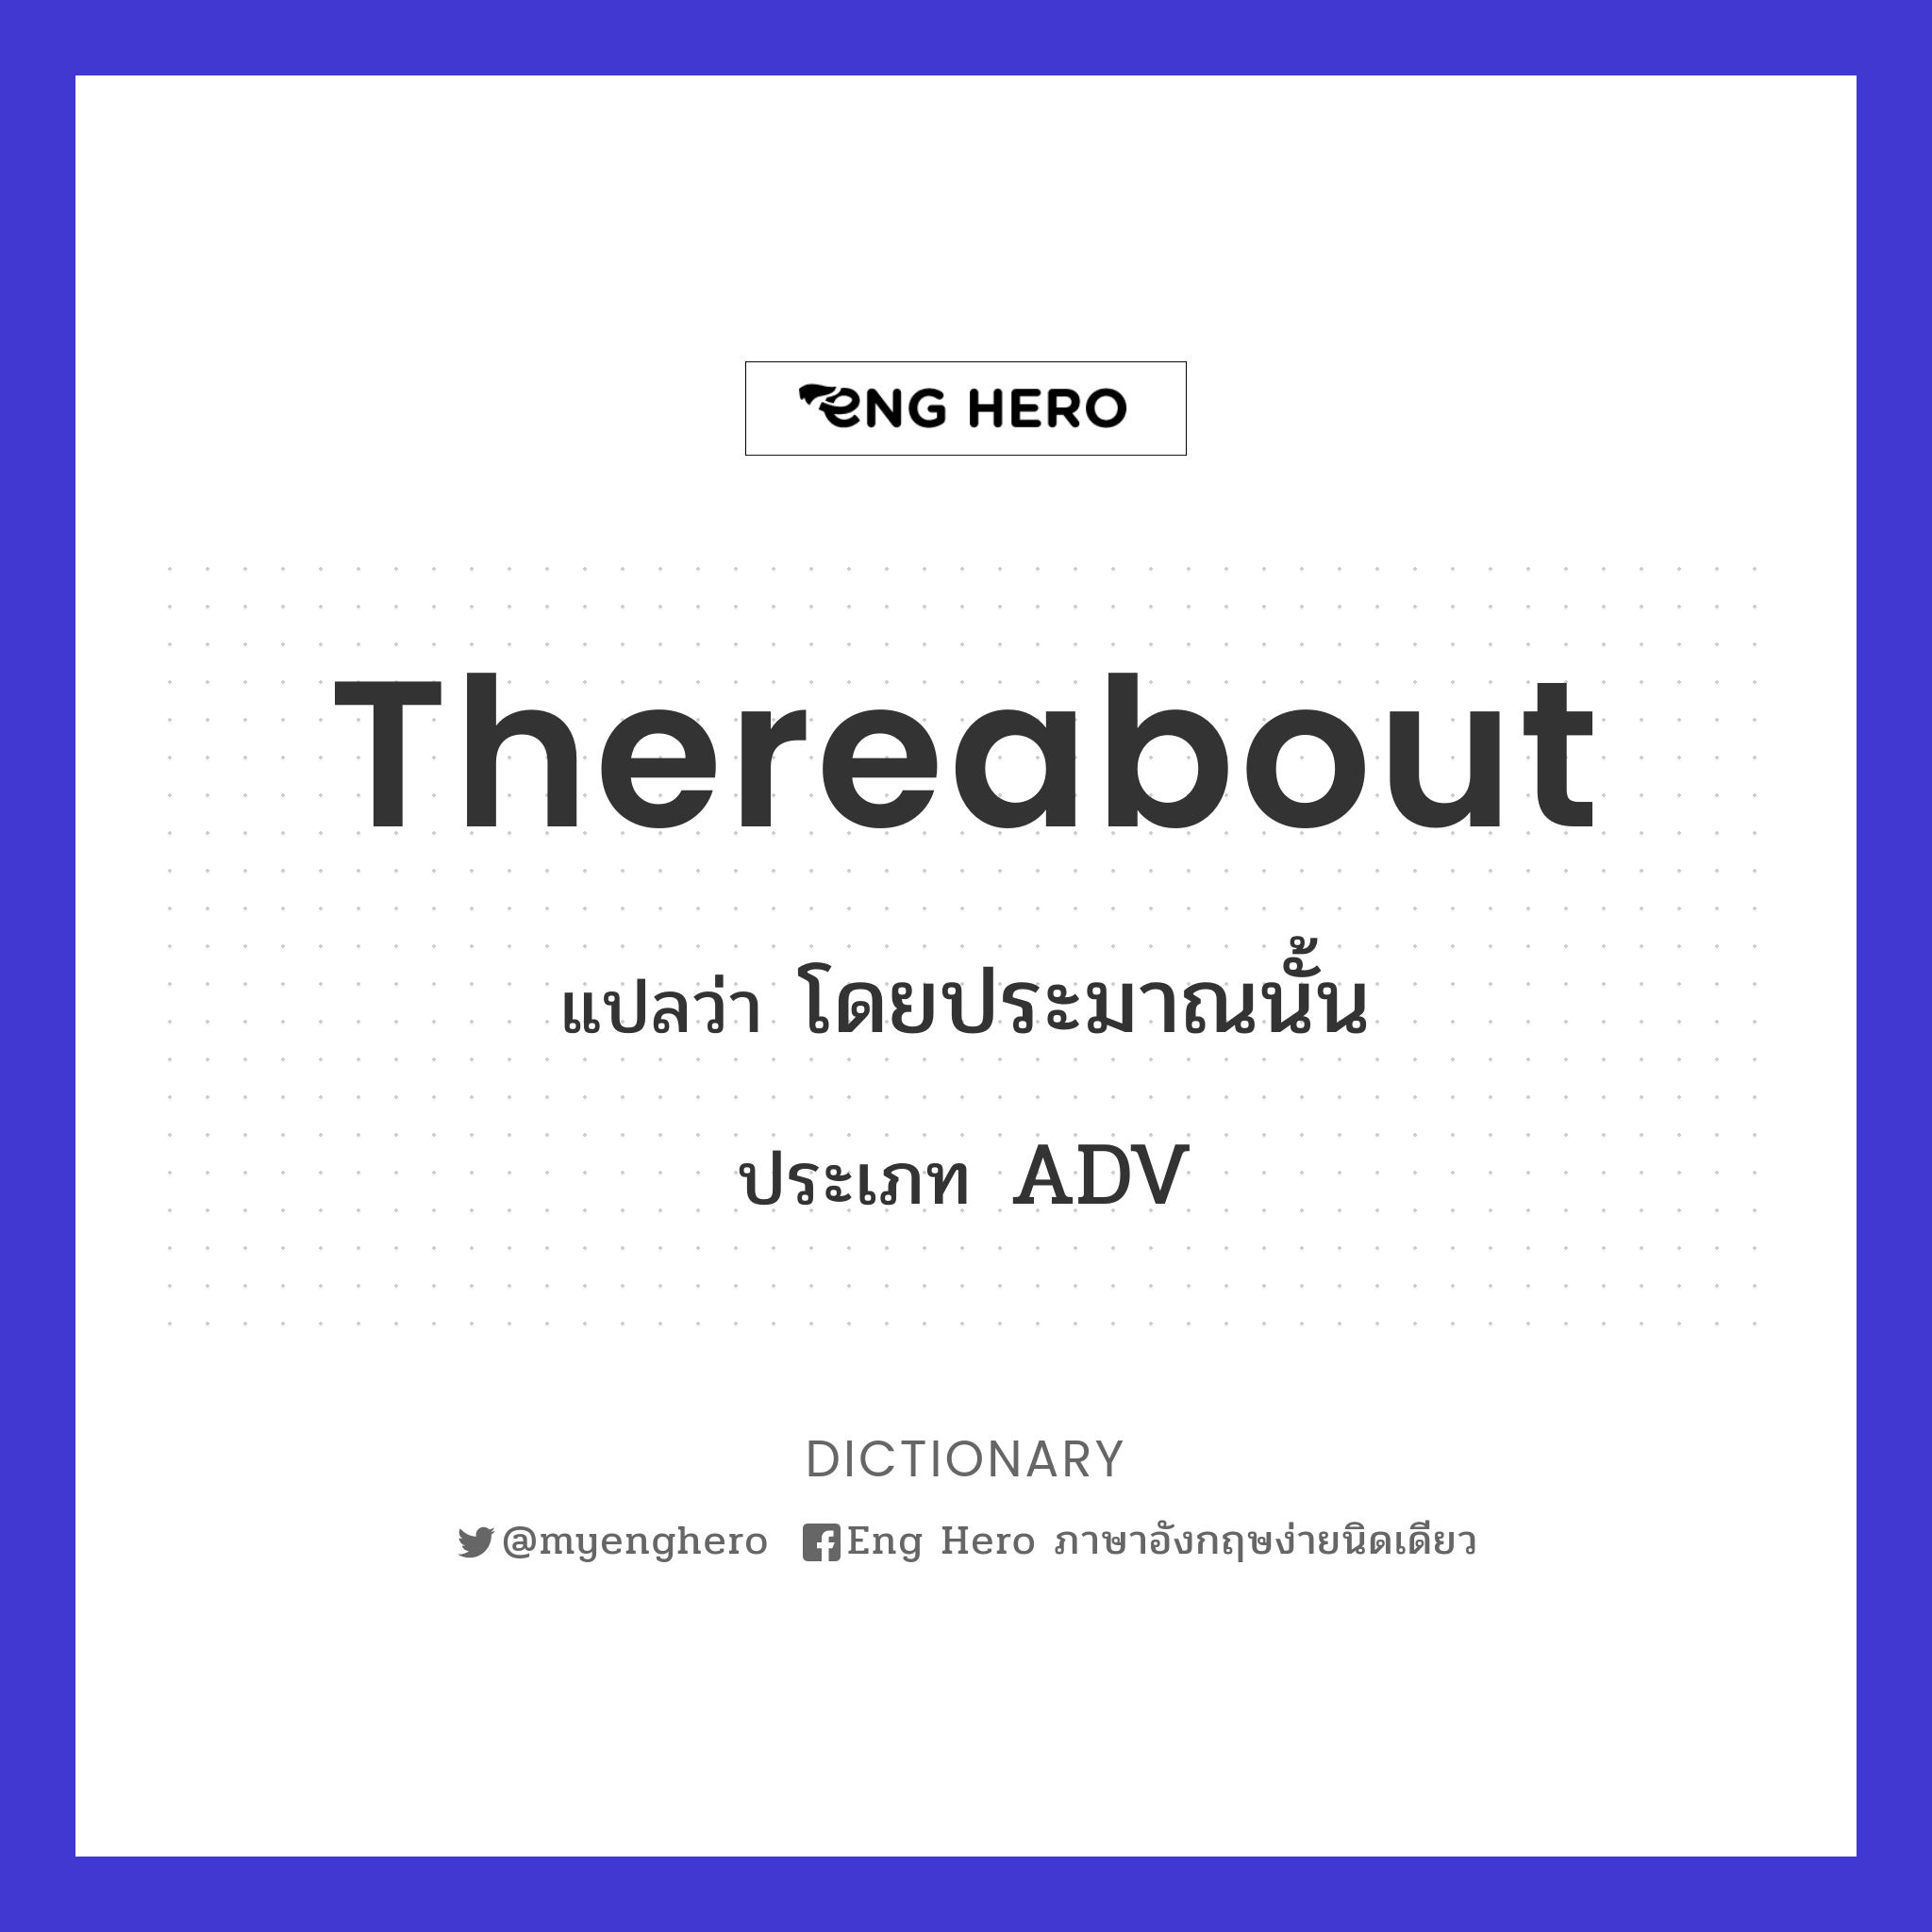 thereabout